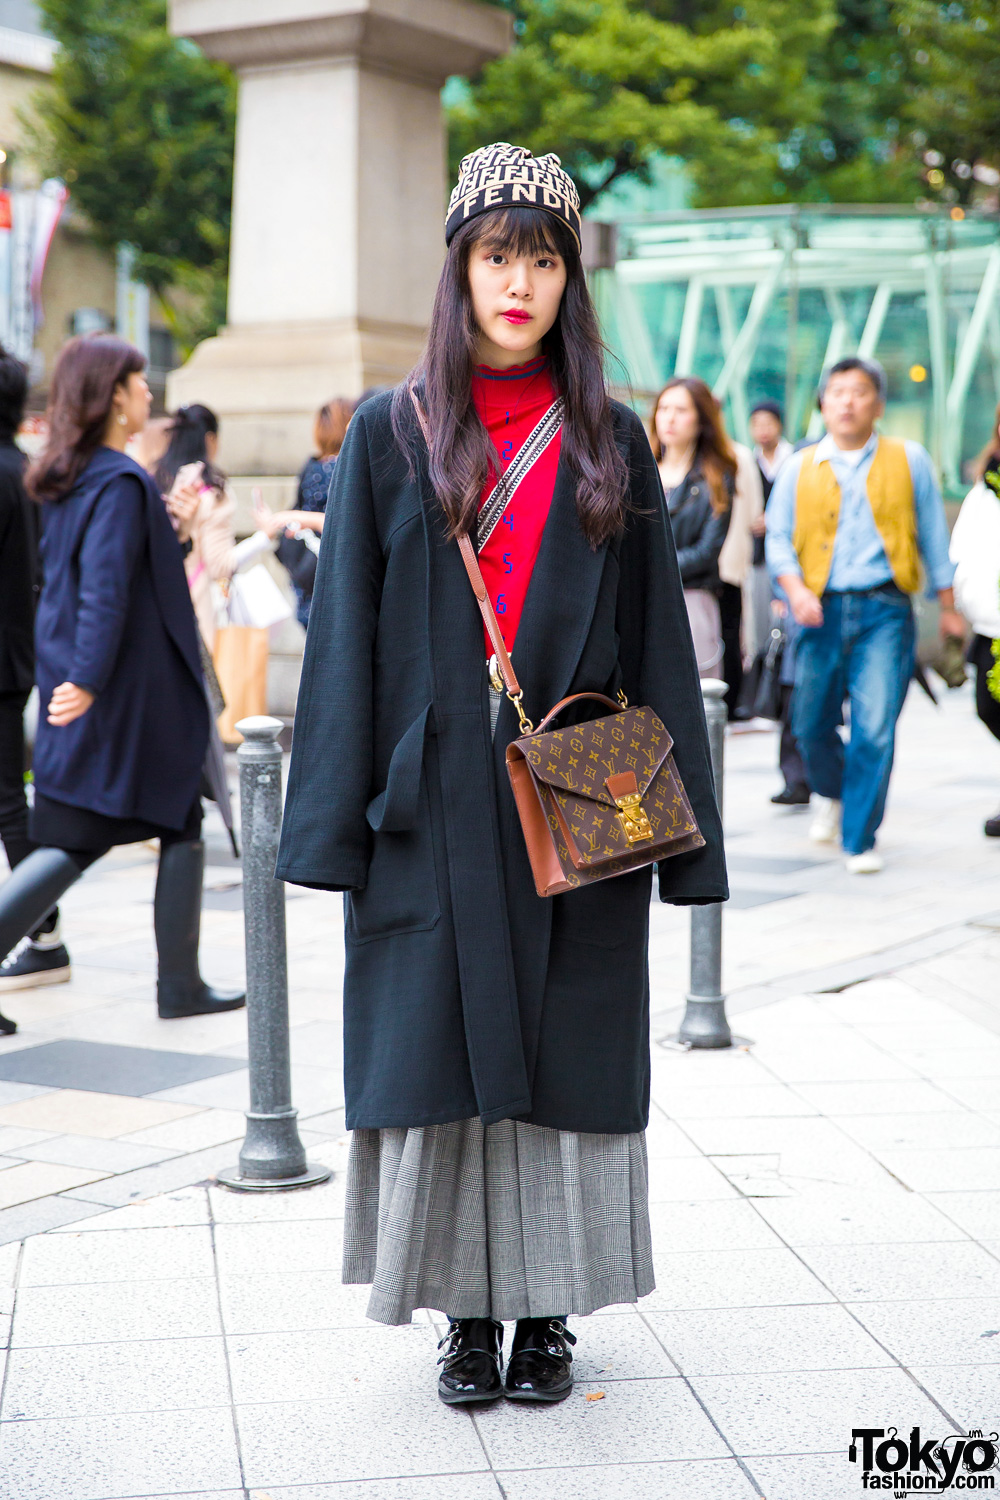 Harajuku Girl in Vintage Maxi Coat From Fethers Goffa, Louis Vuitton, Fendi & Christian Dior Sports